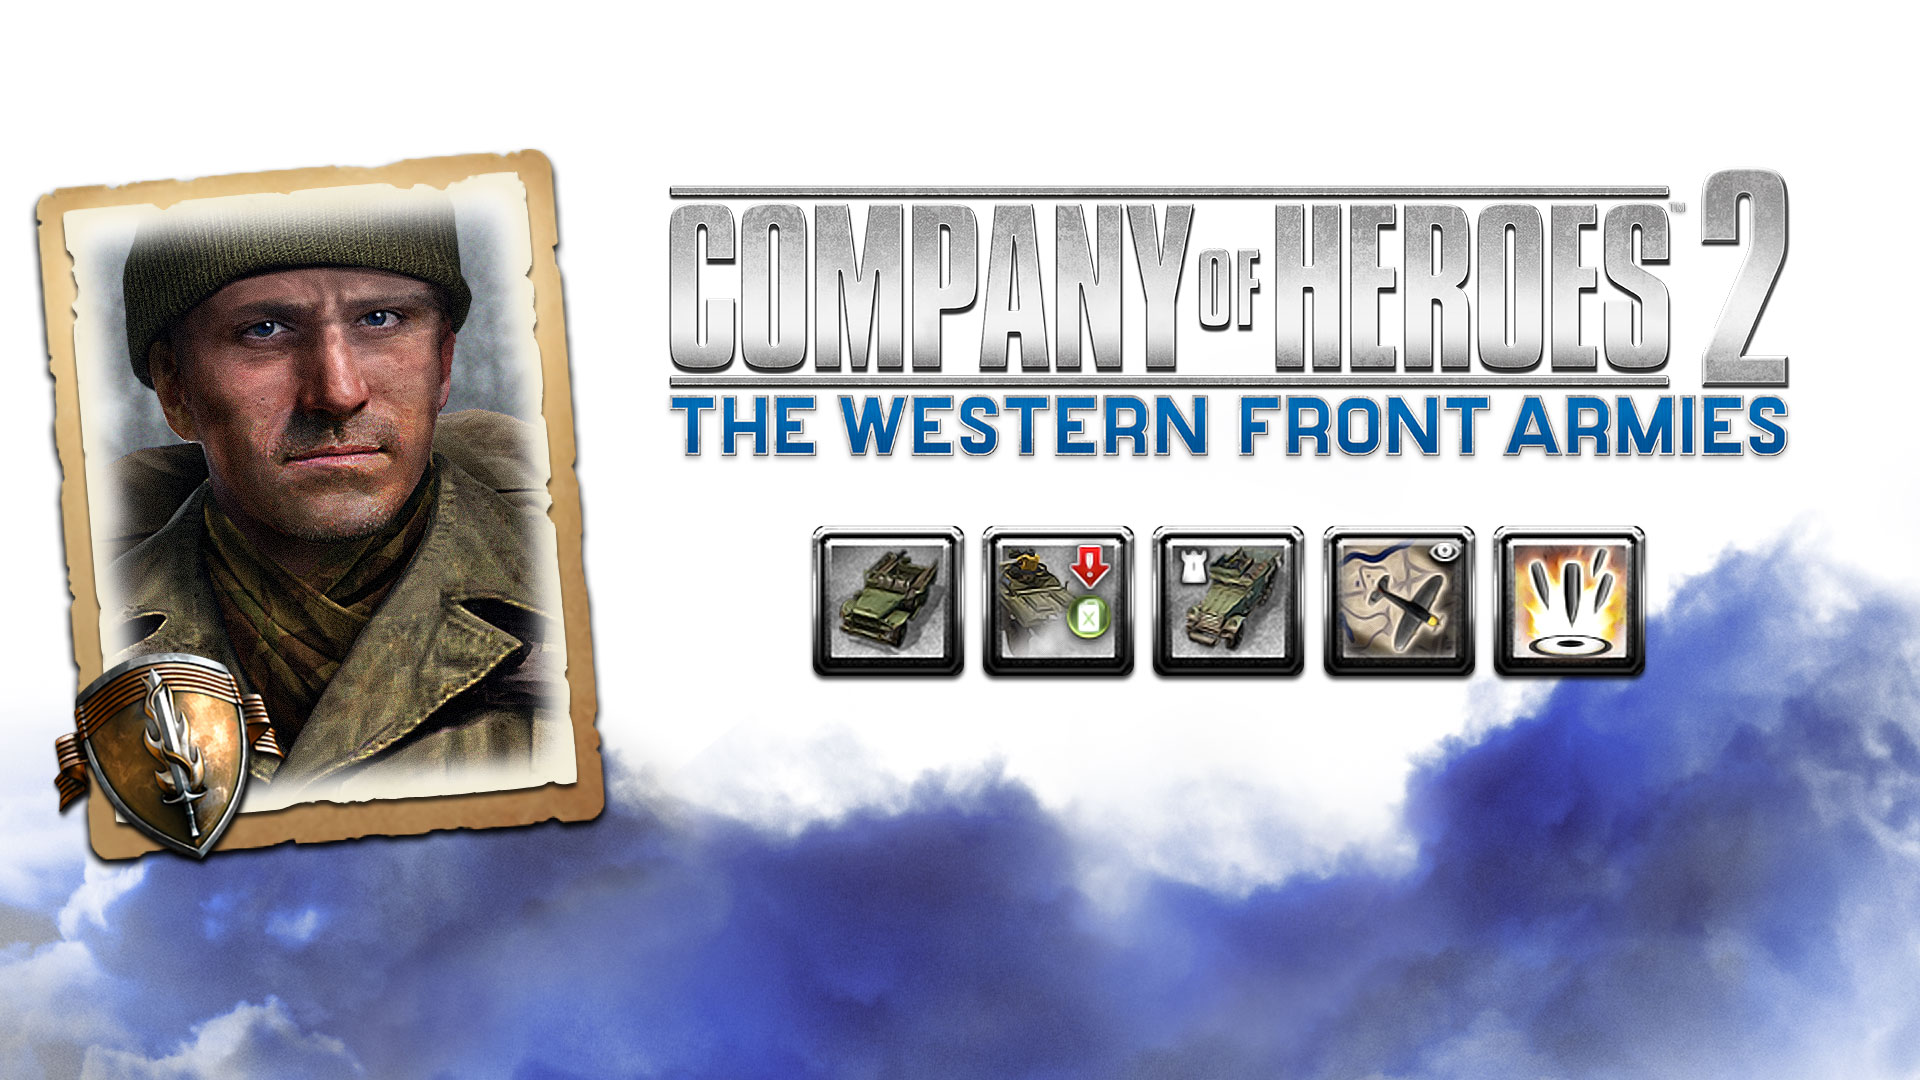 Company of Heroes 2 - US Forces Commanders Collection DLC Steam CD Key 4.17 USD